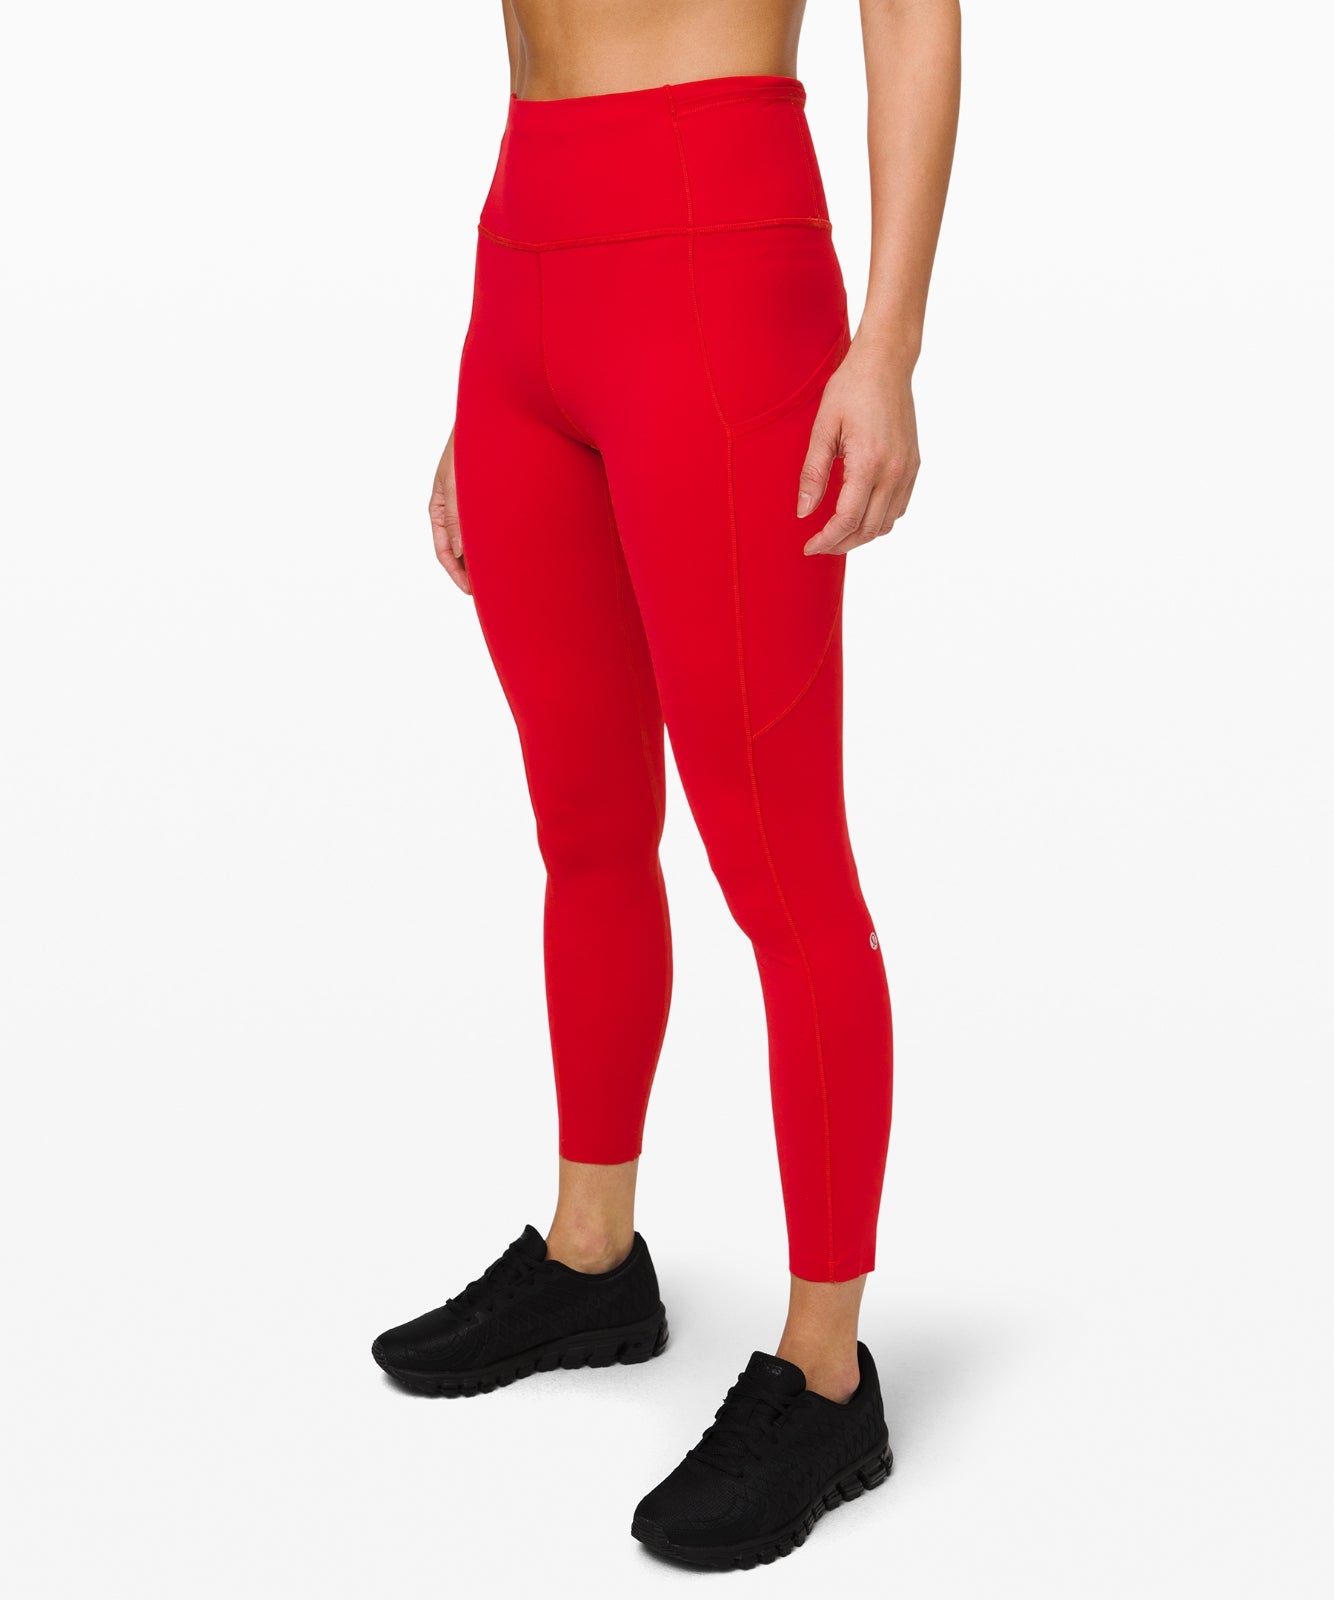 Lululemon Zone In Tight Pant Legging Yoga Sport Size 10 WNBY Red New